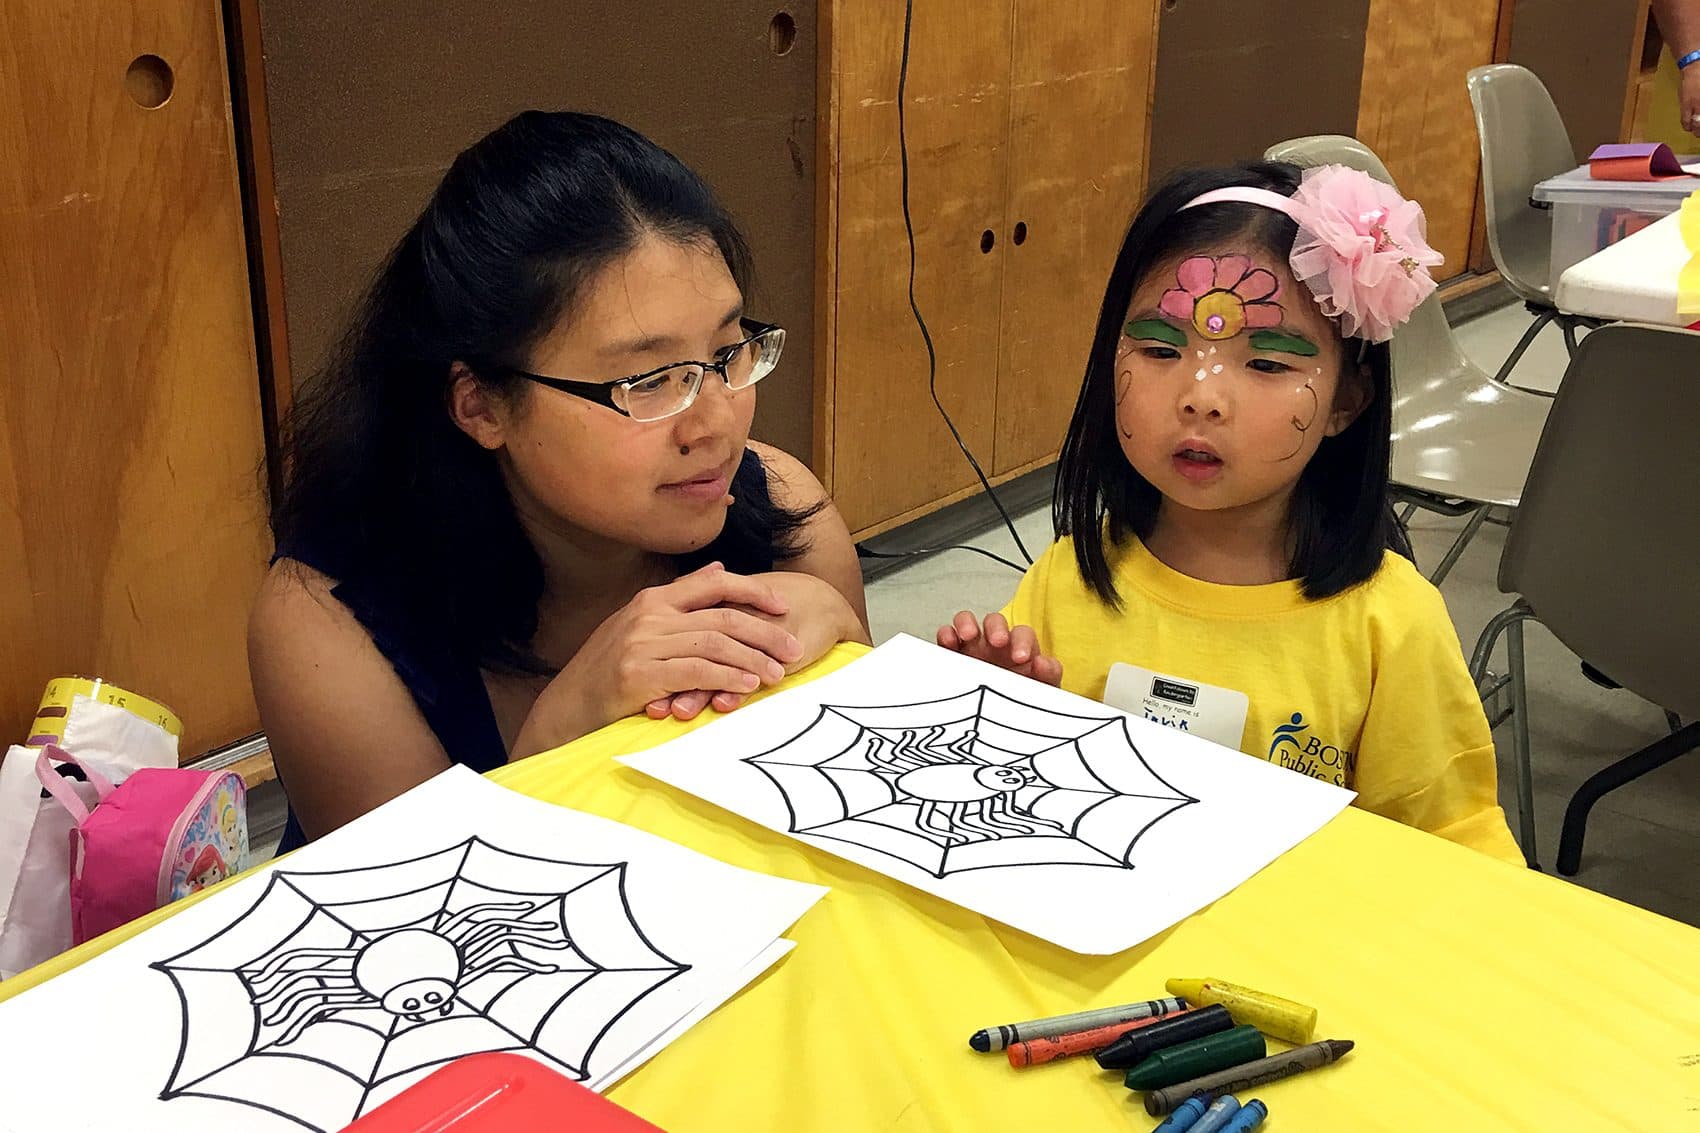 Emily Wu and her 4-year-old daughter, Talia, are at a “Countdown to Kindergarten” party at the South Boston branch of the Boston Public Library. (Tonya Mosley/WBUR)